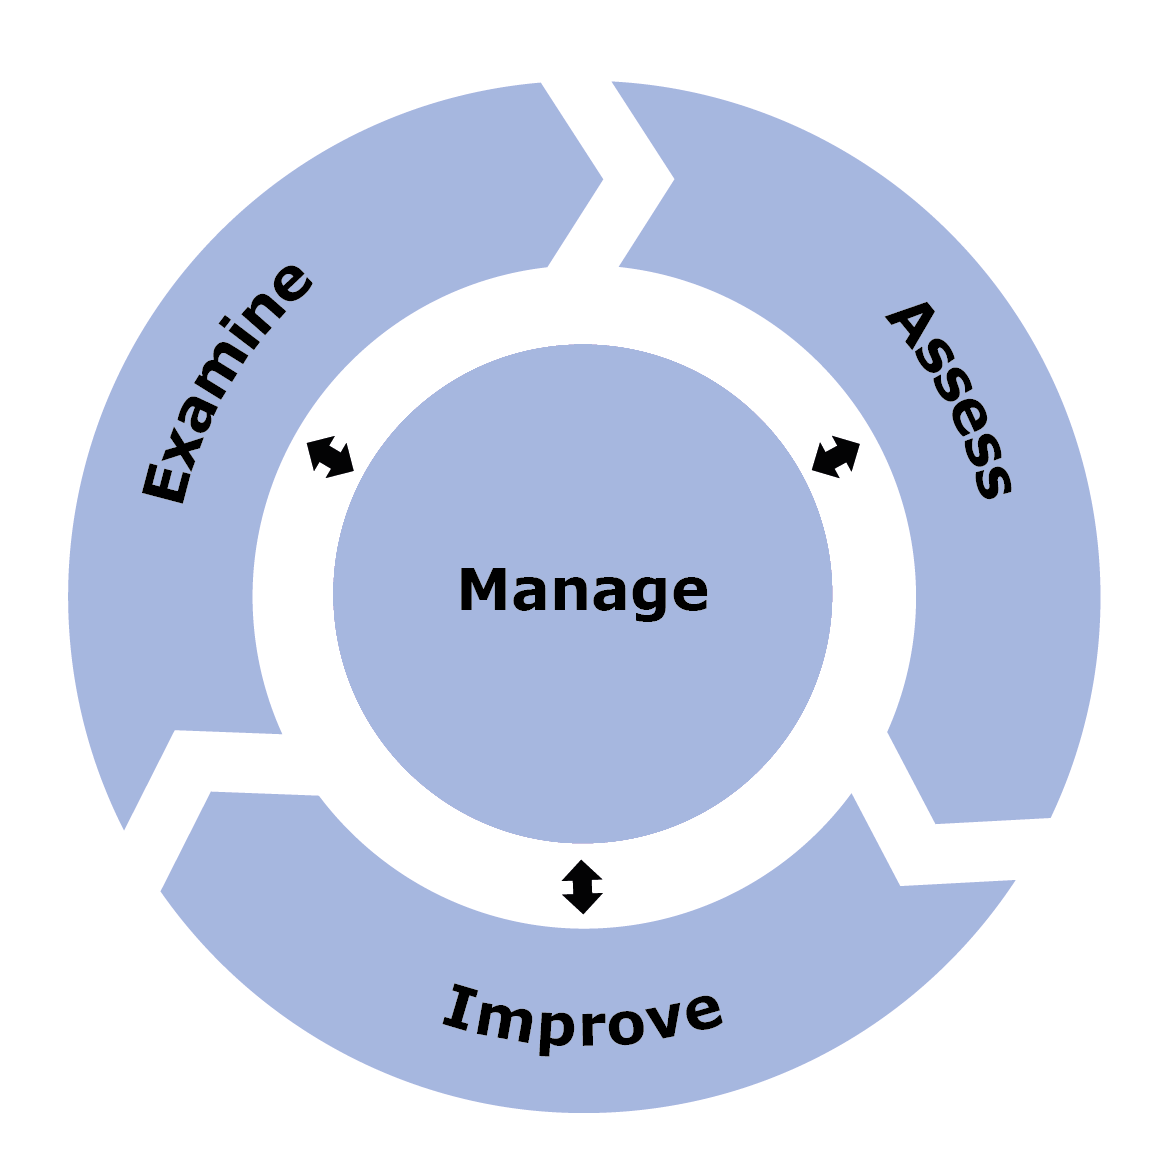 The SSA process consists of the Examine, Assess and Implement phases, guided and informed by Manage